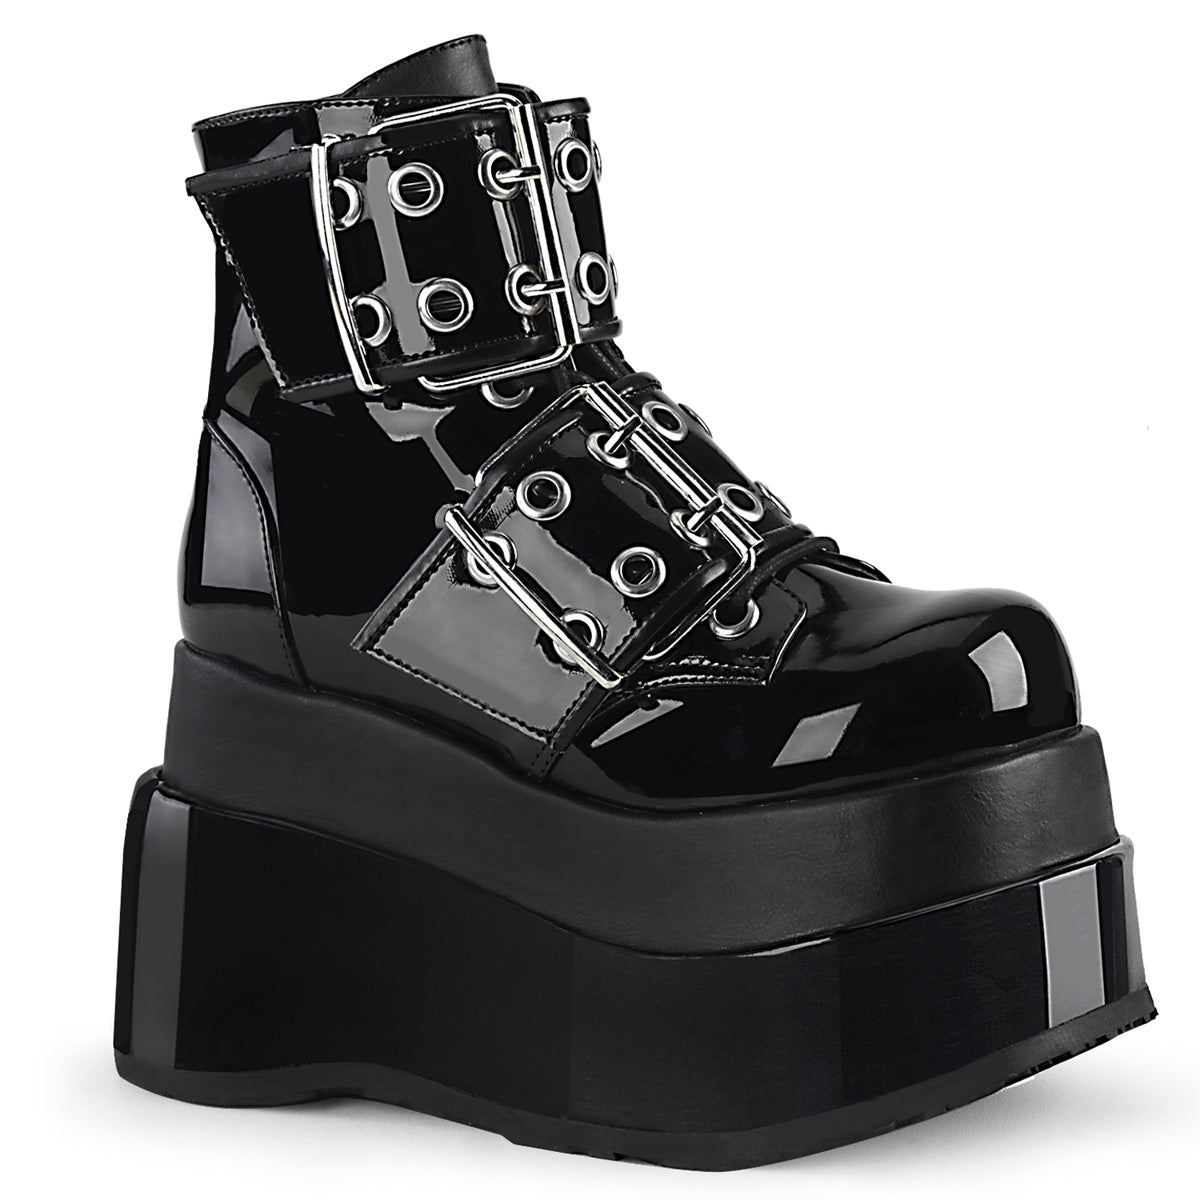 BEAR-104 Black Ankle Boots